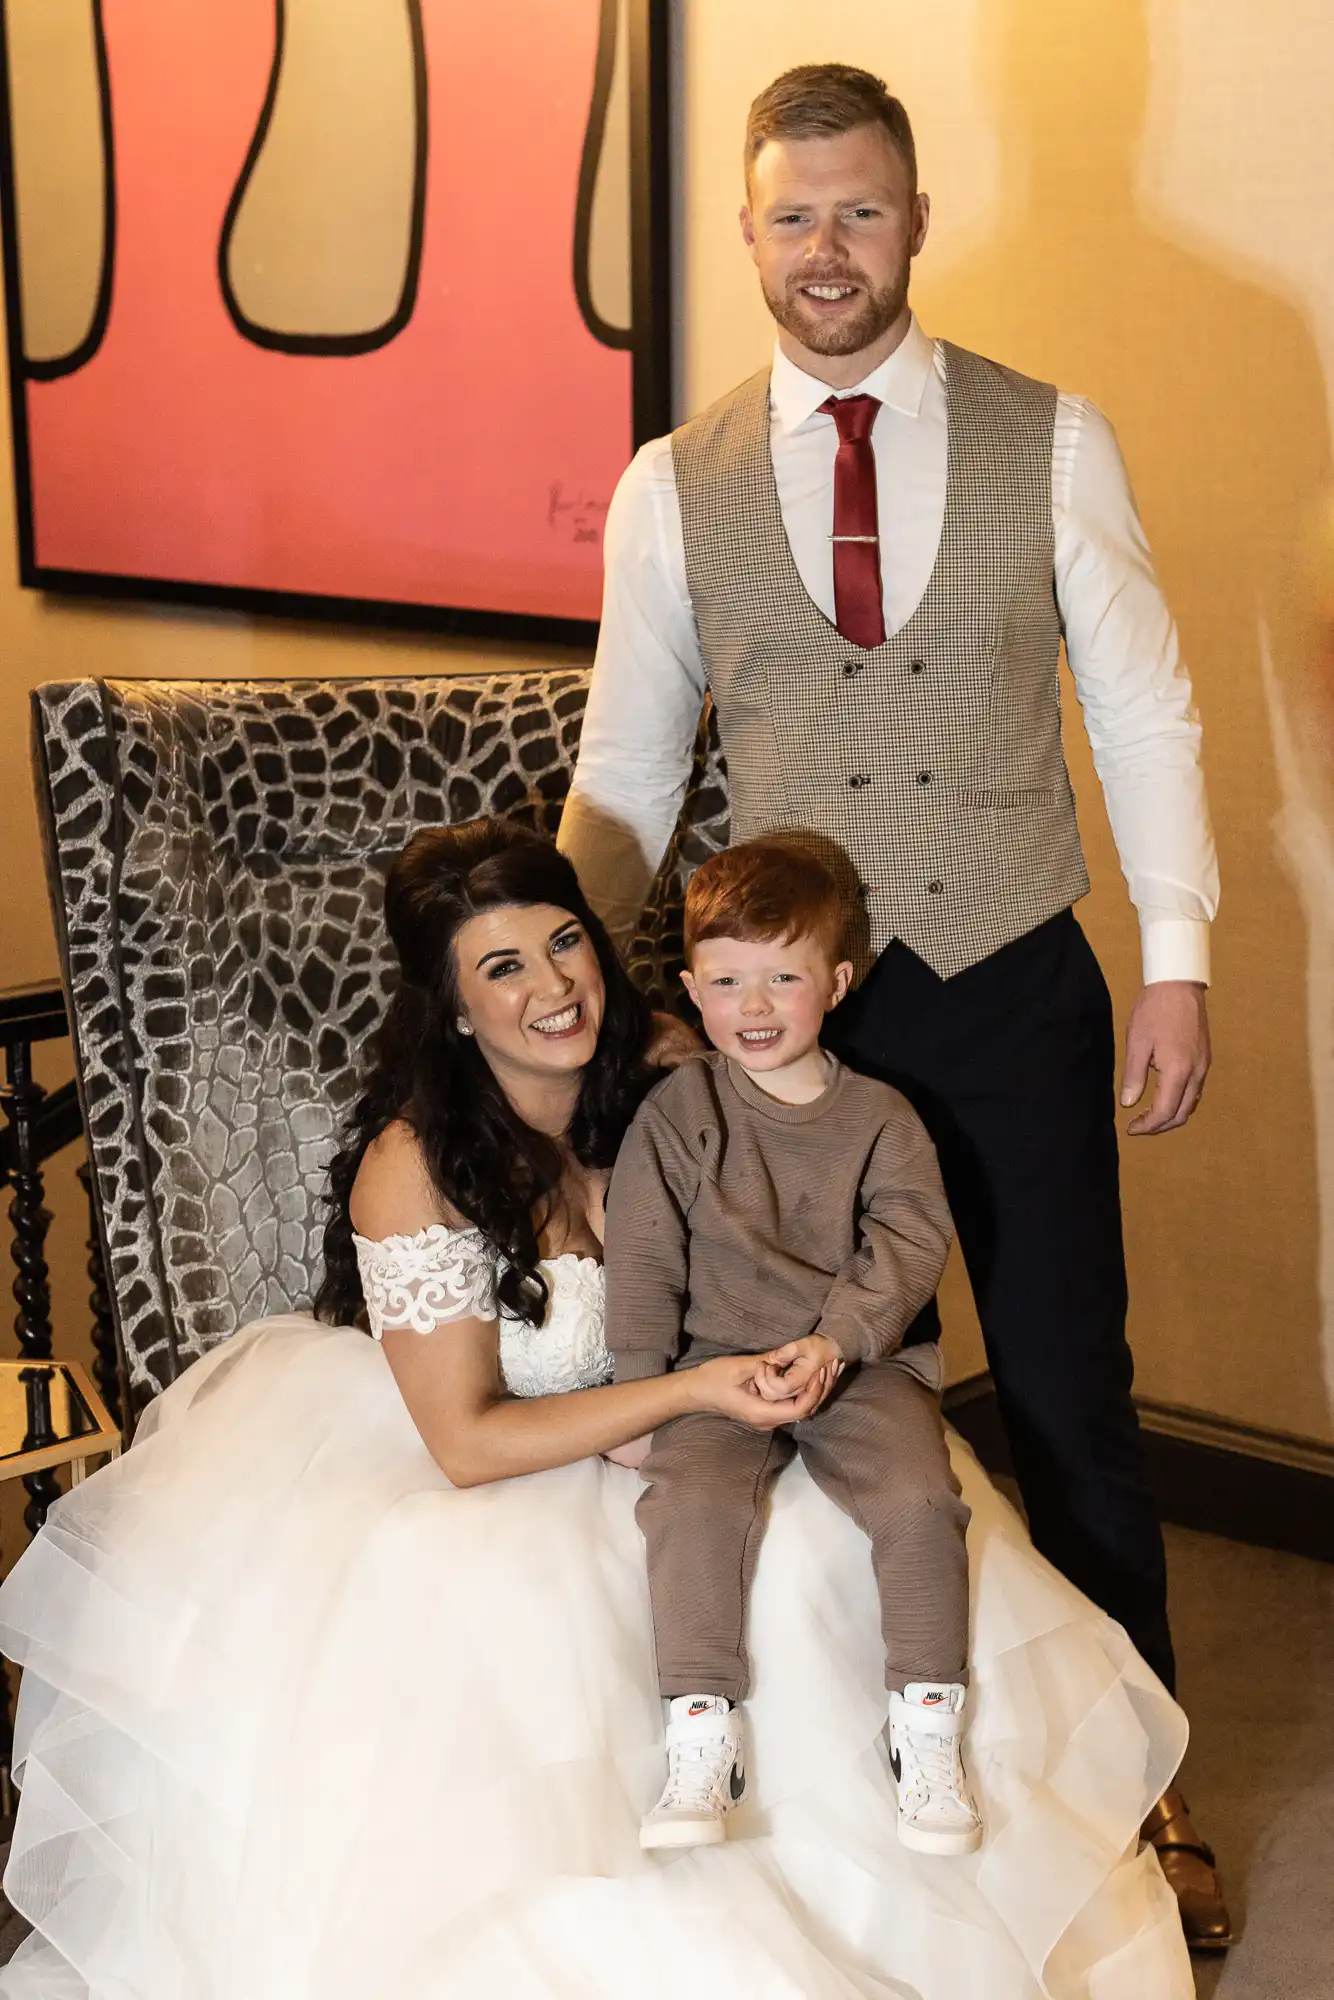 A woman in a white wedding dress sits with a young boy in brown clothes, while a man in a vest stands behind them, all smiling, in a room with artwork.